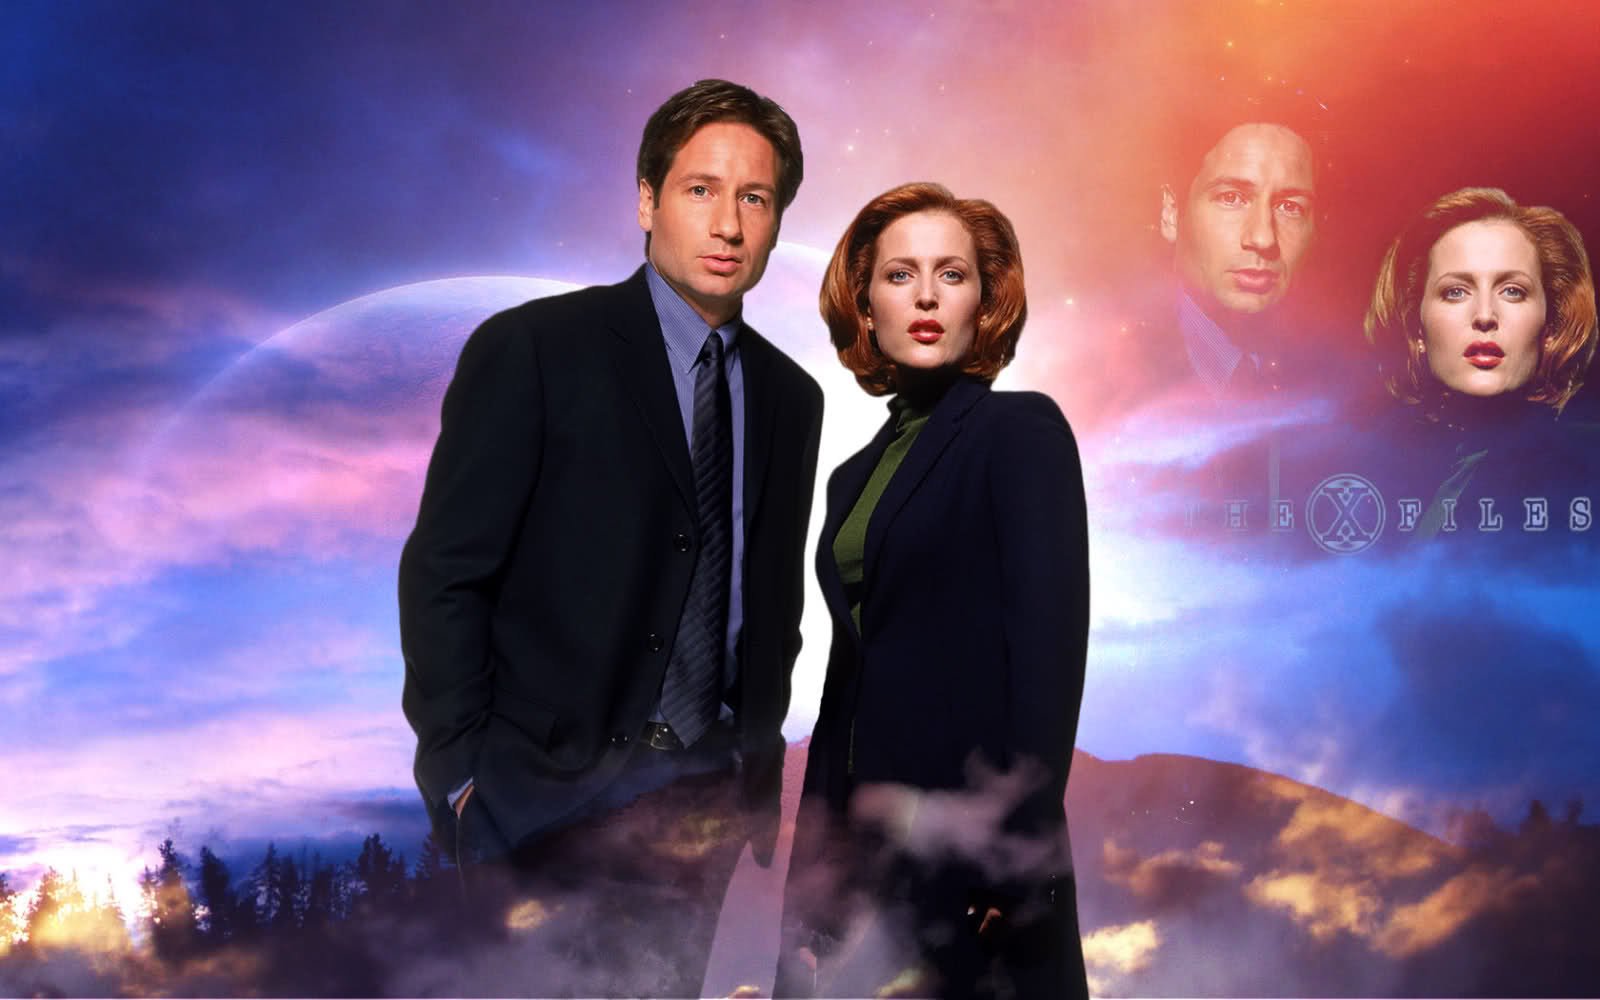 the, X files, Sci fi, Mystery, Drama, Television, Files, Series, Poster Wal...